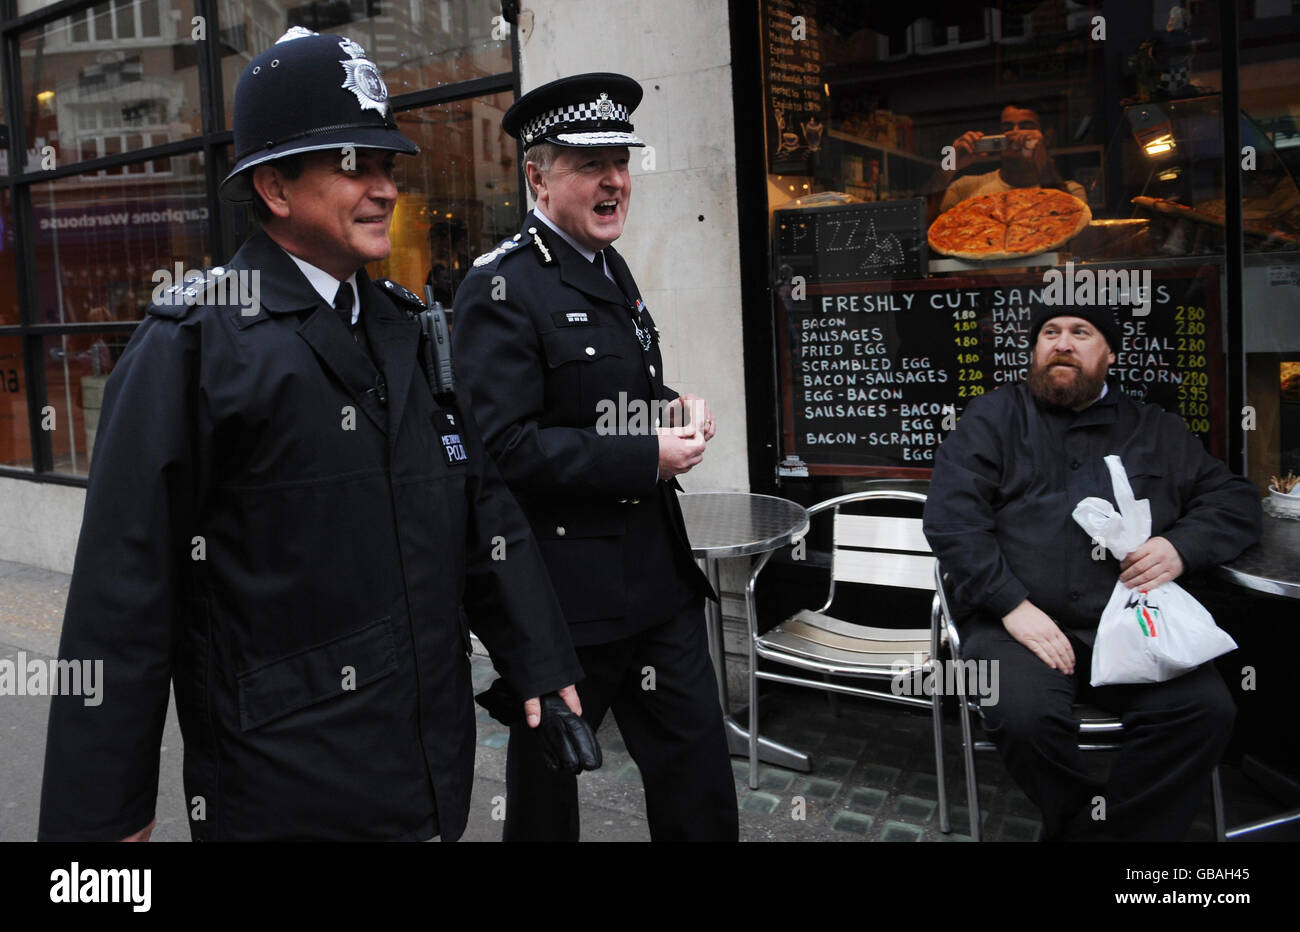 Metropolitan Police Commissioner Sir Ian Blair and with PC Andy Moss walk through the streets of Soho, London, where Sir Ian used to patrol 34 years ago. Stock Photo